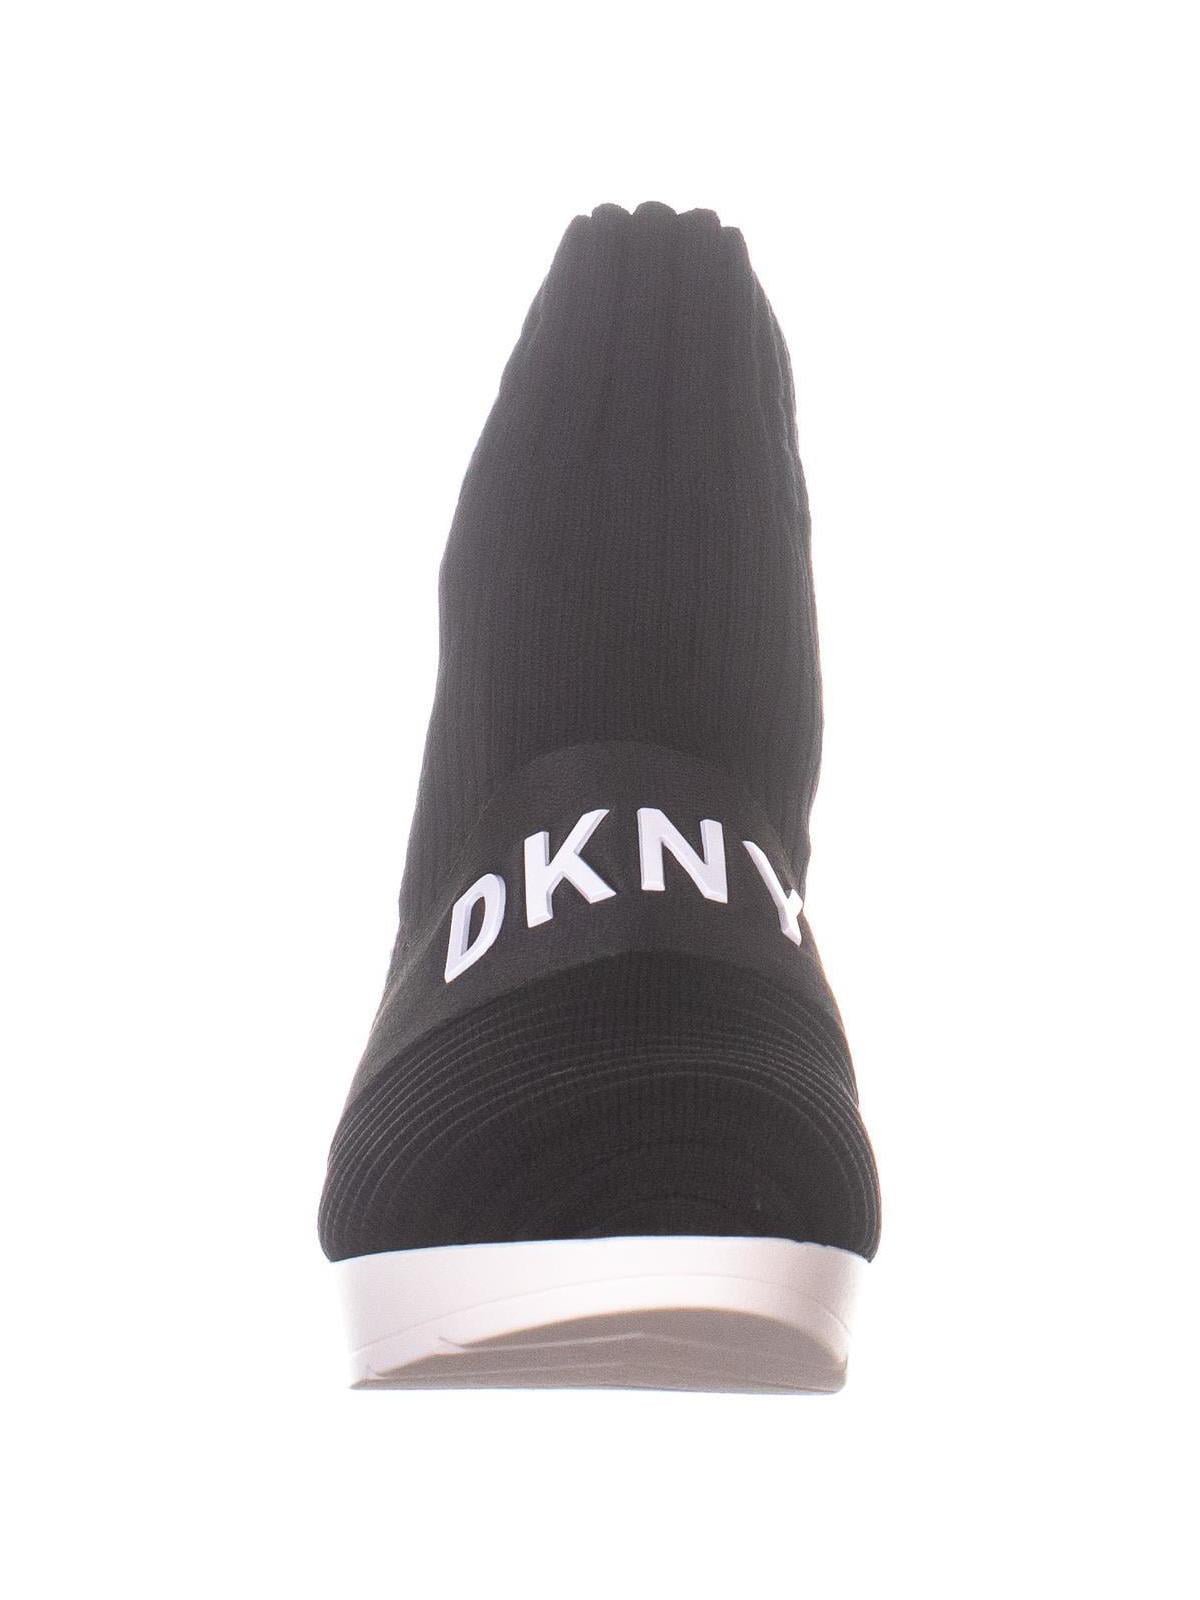 dkny anna wedge sneakers